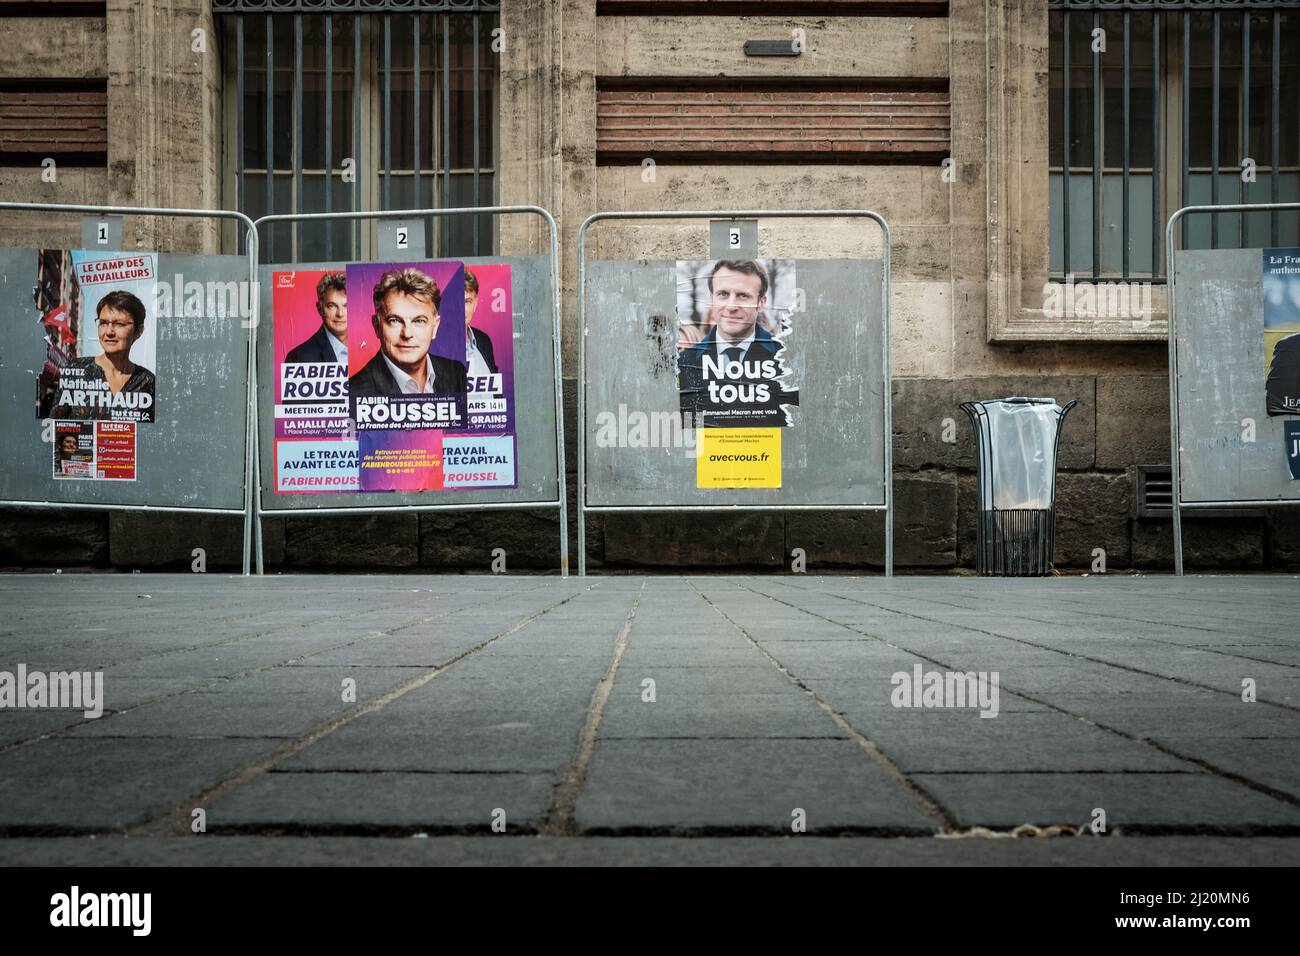 Nathalie ARTHAUD, Fabien ROUSSEL, Emmanuel MACRON. Fifteen days before the first round of the 2022 presidential elections, the official panels are available for the posters of each candidate. Toulouse, France, March 28, 2022. Monday 28th March marks the official beginning of presidential campaign season. The number of candidates running has already been cut down to 12 after a number of figures failed to gather enough parrainages, or signatures of support. Photo by Patrick Batard/ABACAPRESS.COM Stock Photo